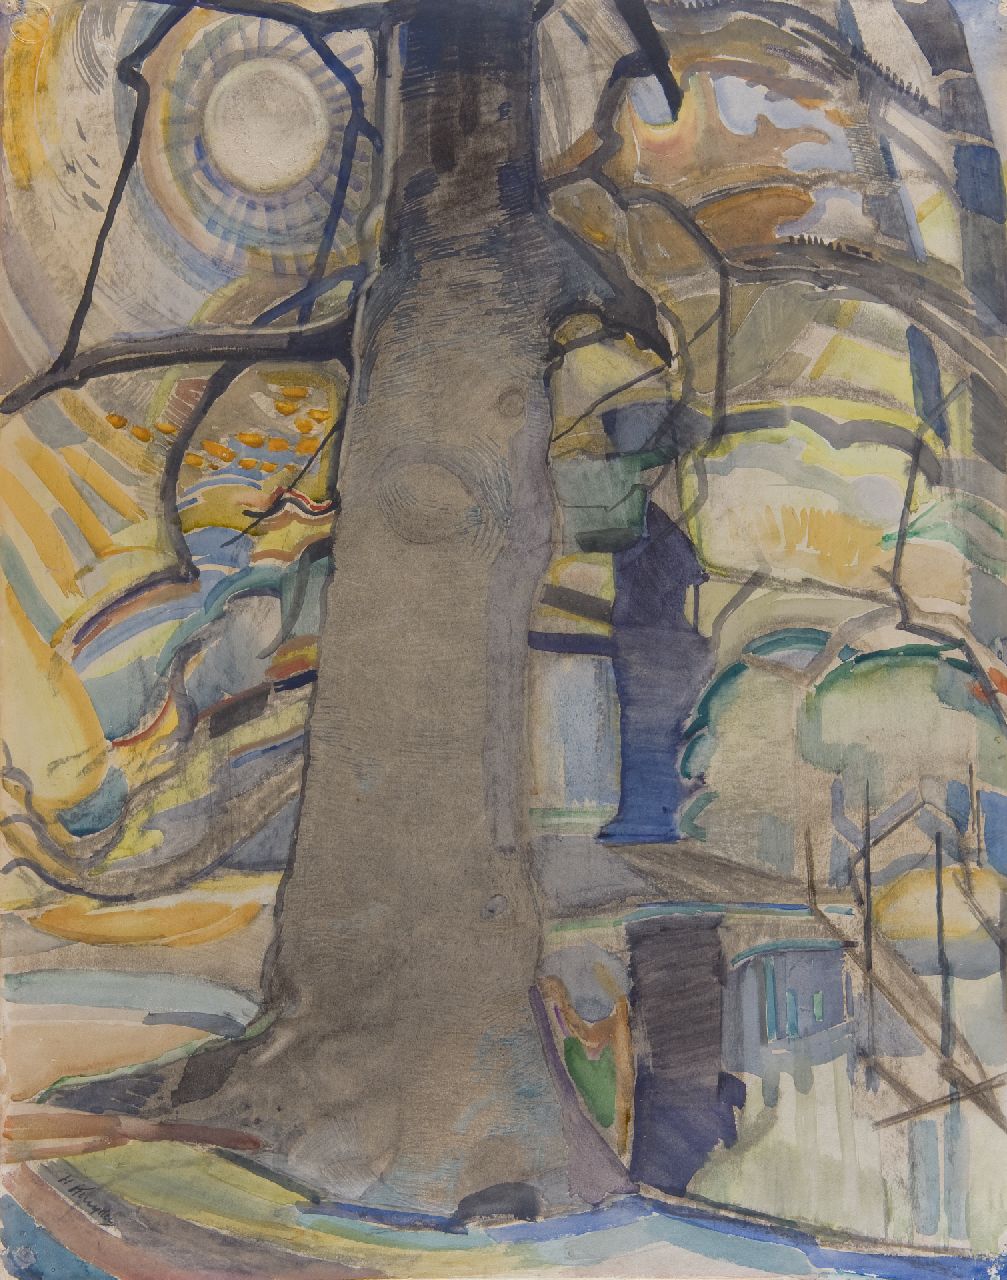 Kruyder H.J.  | 'Herman' Justus Kruyder, The beech tree, chalk and watercolour on paper 63.1 x 49.5 cm, signed l.l. and executed ca. 1917-1918